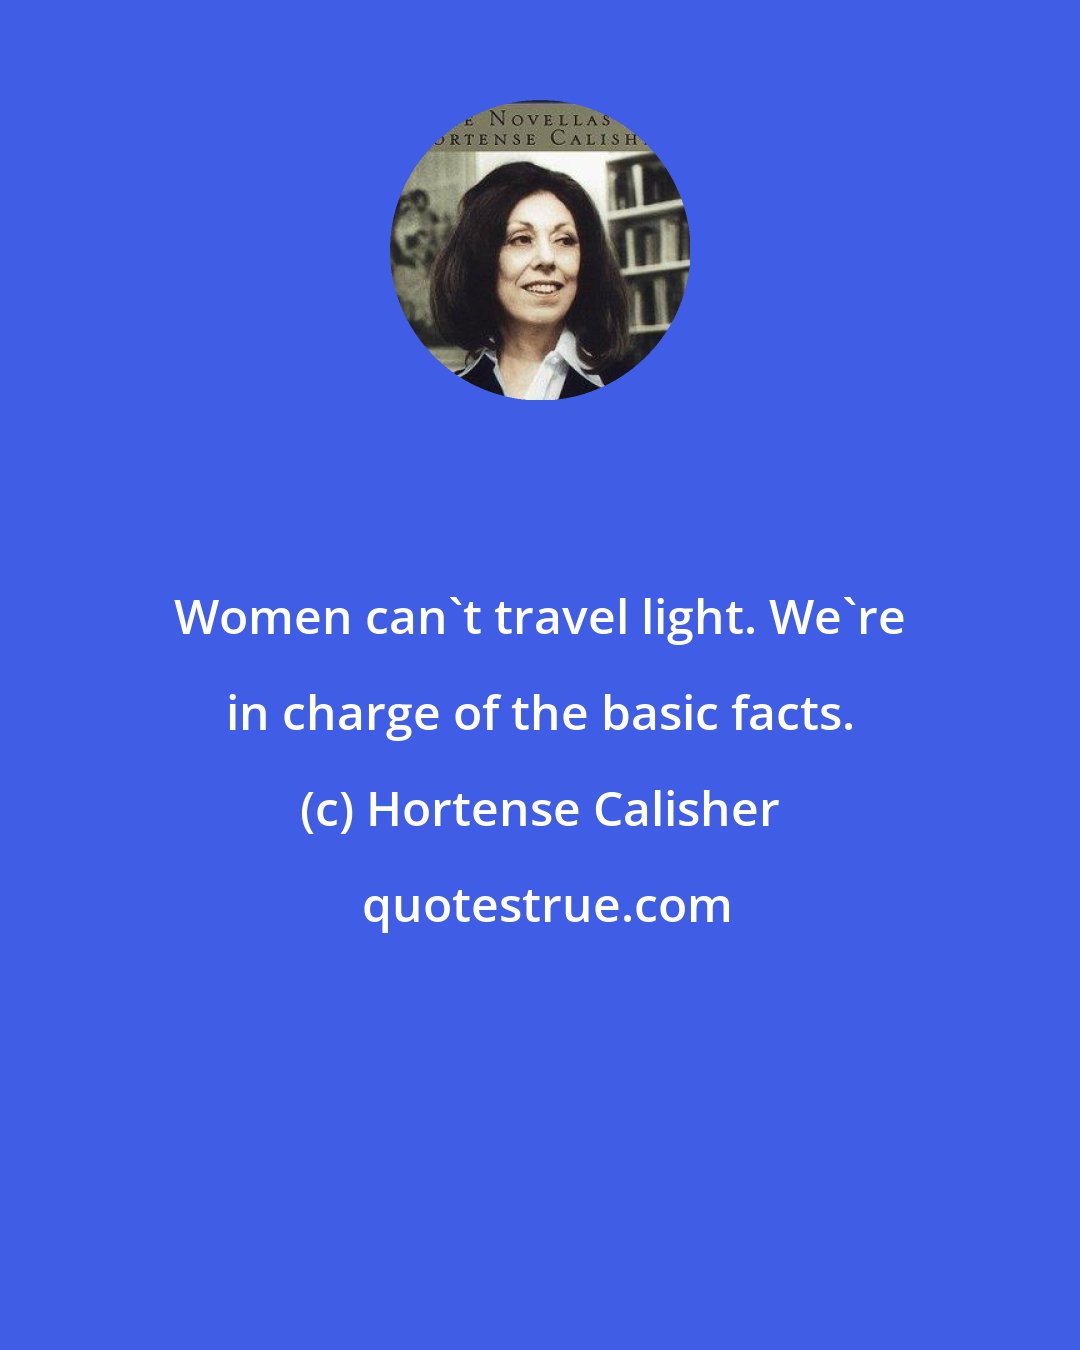 Hortense Calisher: Women can't travel light. We're in charge of the basic facts.